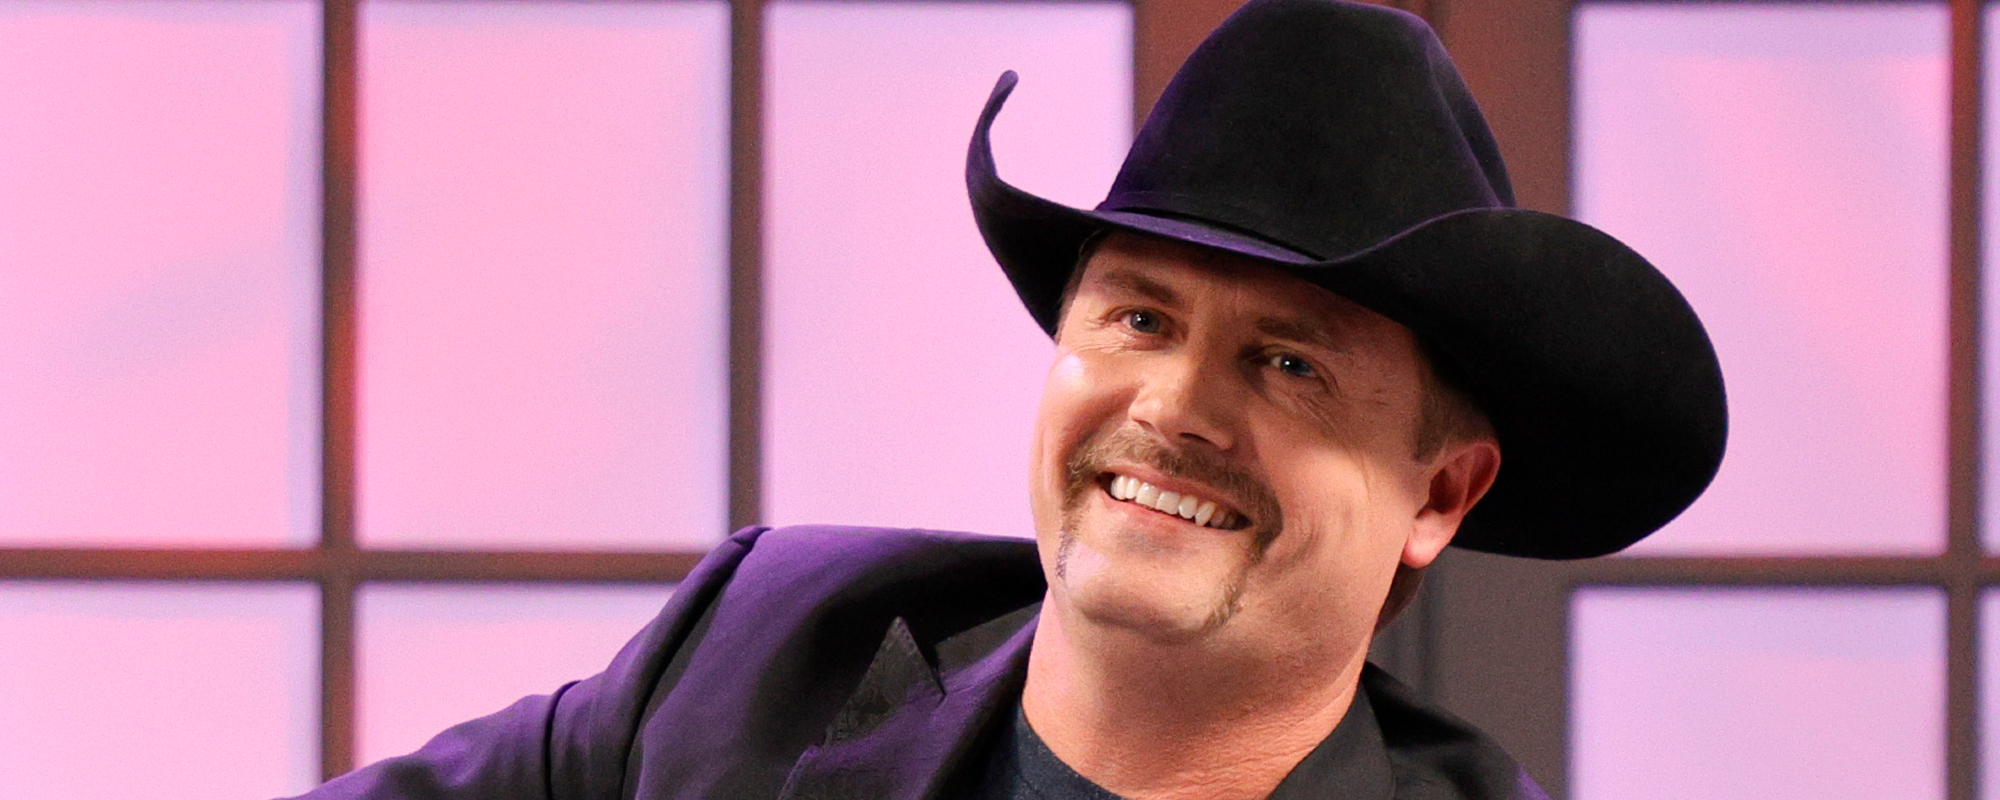 John Rich Slams Nashville for Taking Away Creative Freedom: “They Just Completely Control These Artists”